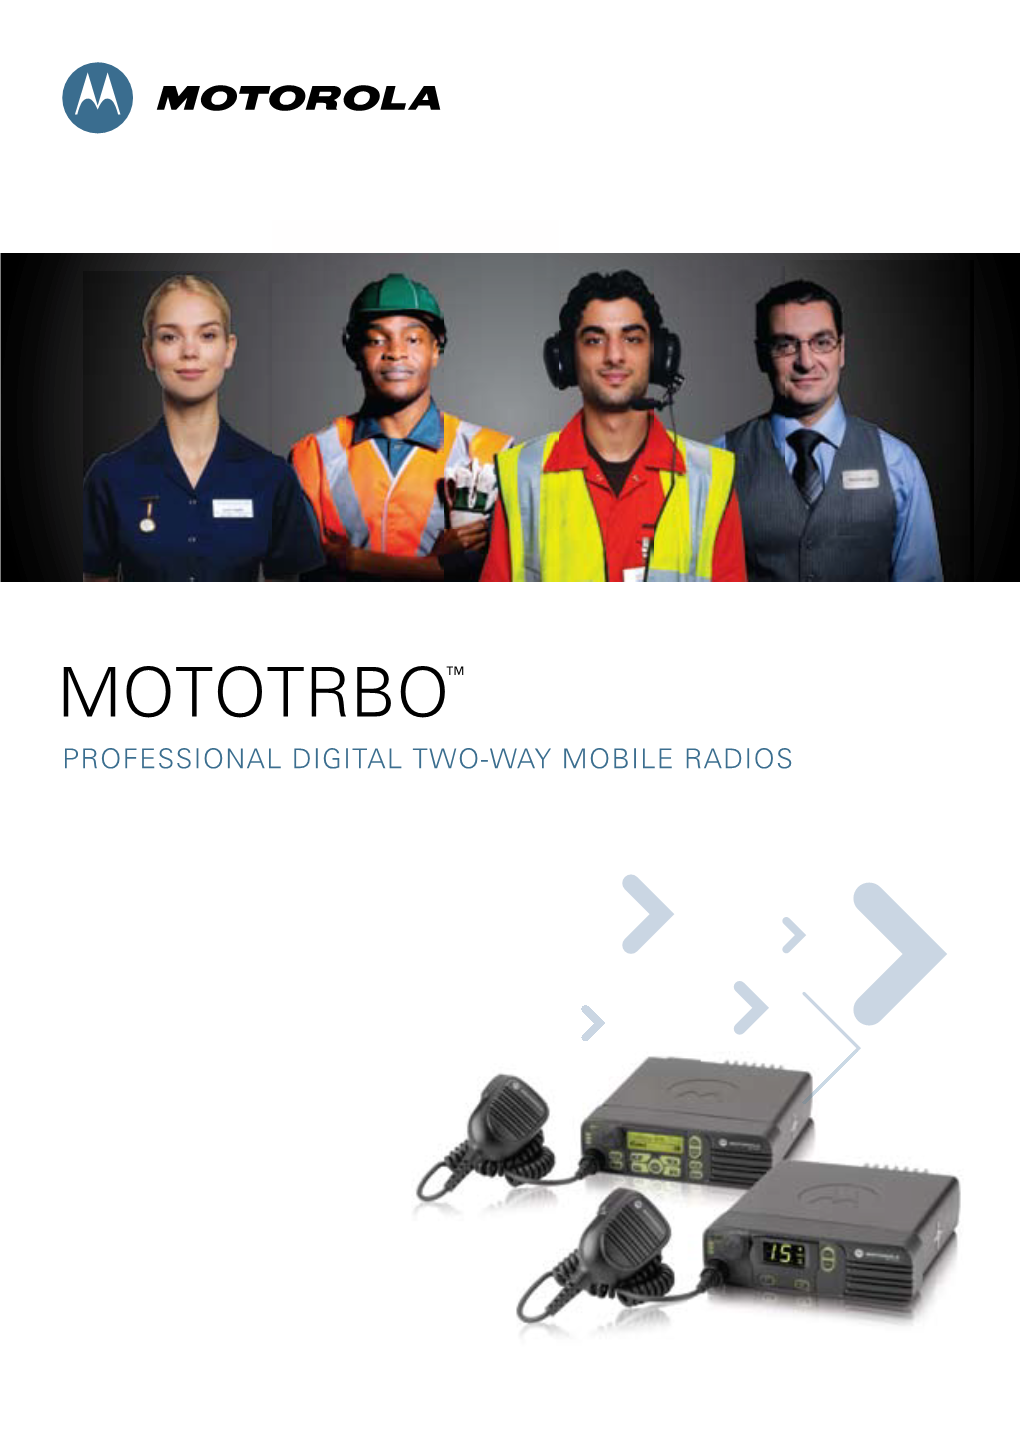 Mototrbo™ Professional Digital Two-Way Mobile Radios Accelerate Performance